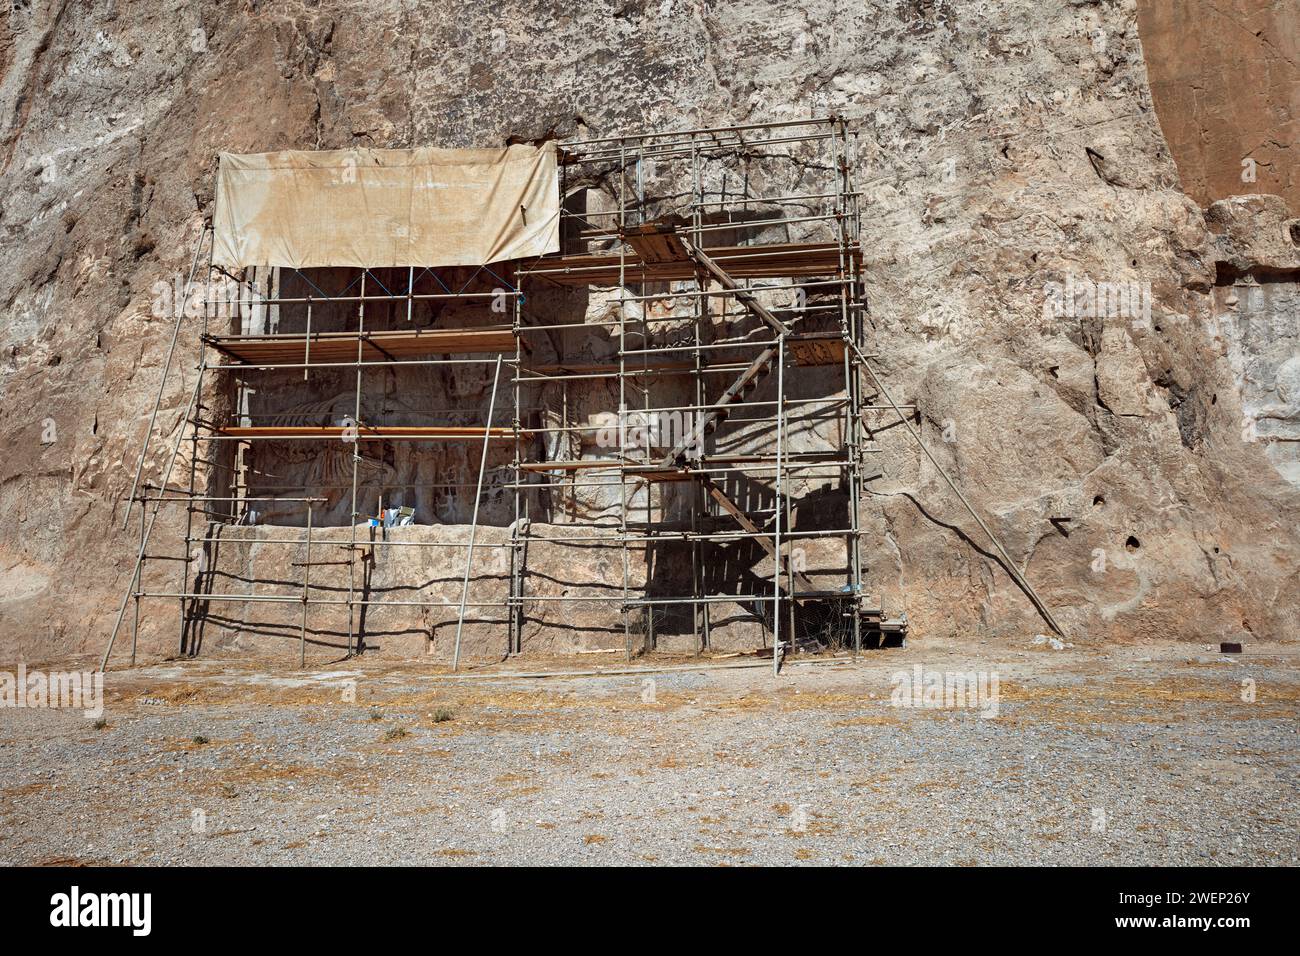 Rock relief “Victory of king Shapur I over Roman emperors Valerian and Philip the Arab” covered by scaffolding for restoration. Naqsh-e Rostam, Iran. Stock Photo